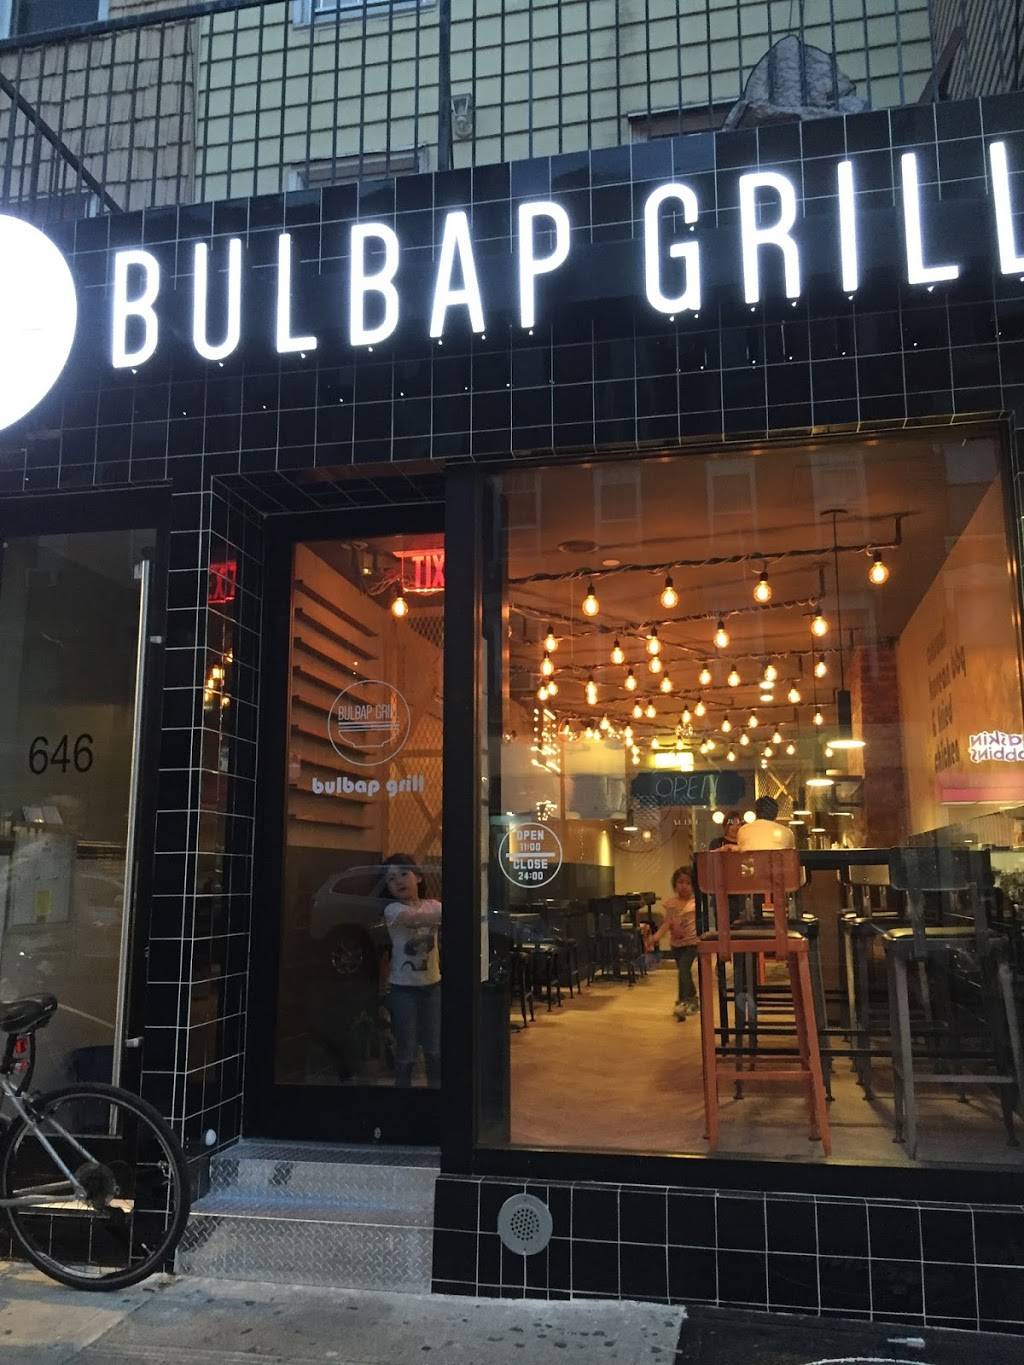 Bulbap Grill | meal delivery | 646 Manhattan Ave, Brooklyn, NY 11222, USA | 7183833663 OR +1 718-383-3663